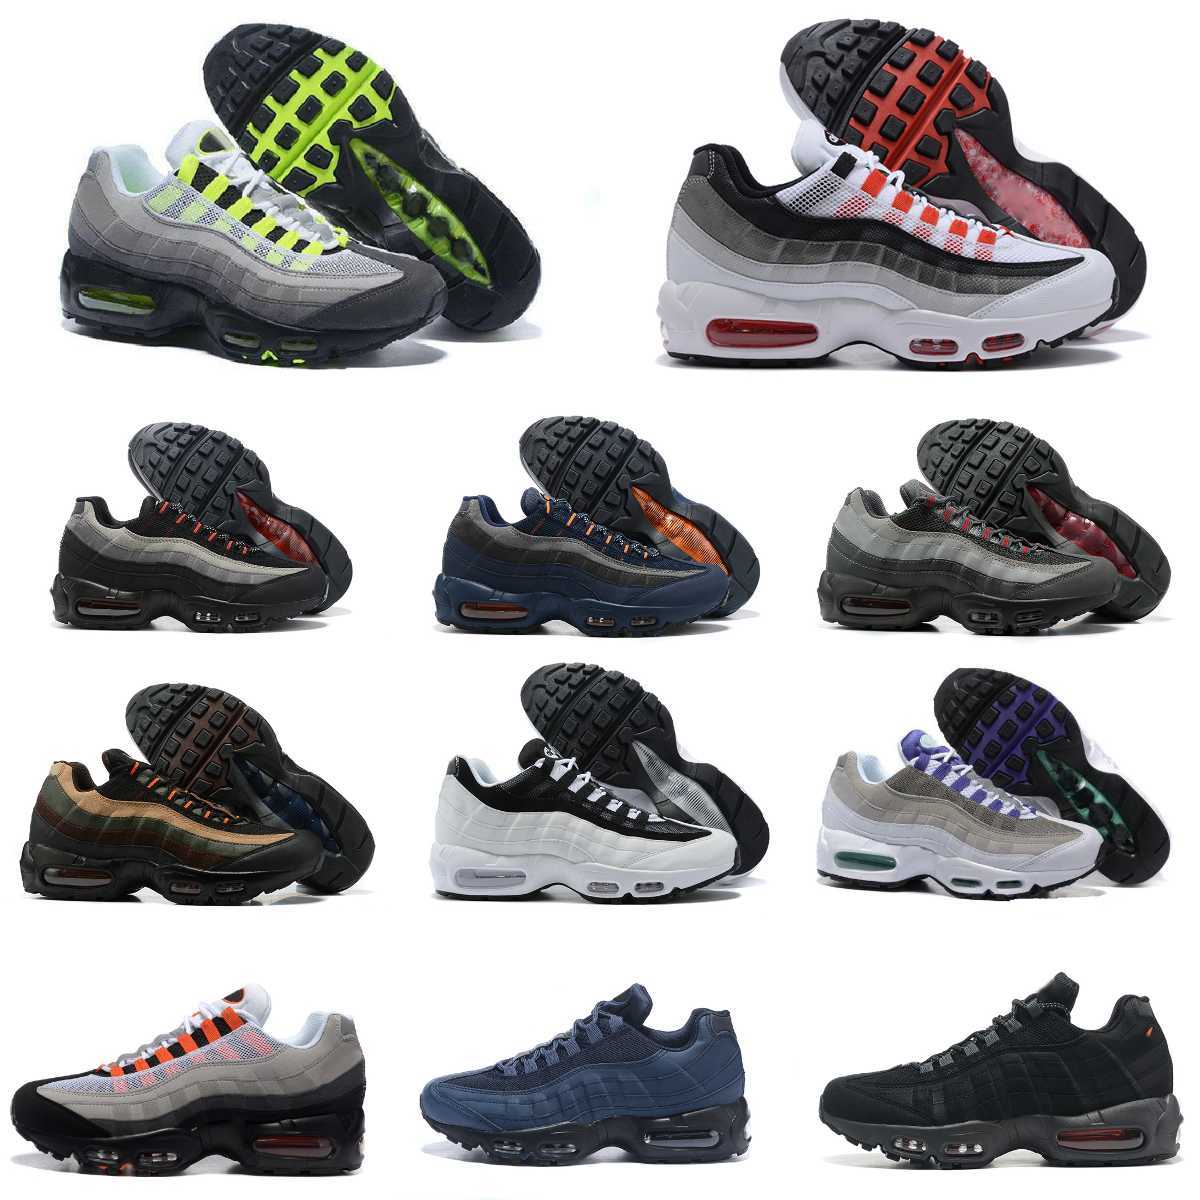 Trainers 95 Mens Running Casual Shoes Airmaxs 95s 25th Anniversary Classic OG Triple Solar Red Black White Blue Club Neon Cork Greedy Dark Smoke Grey Brand Sneakers S1